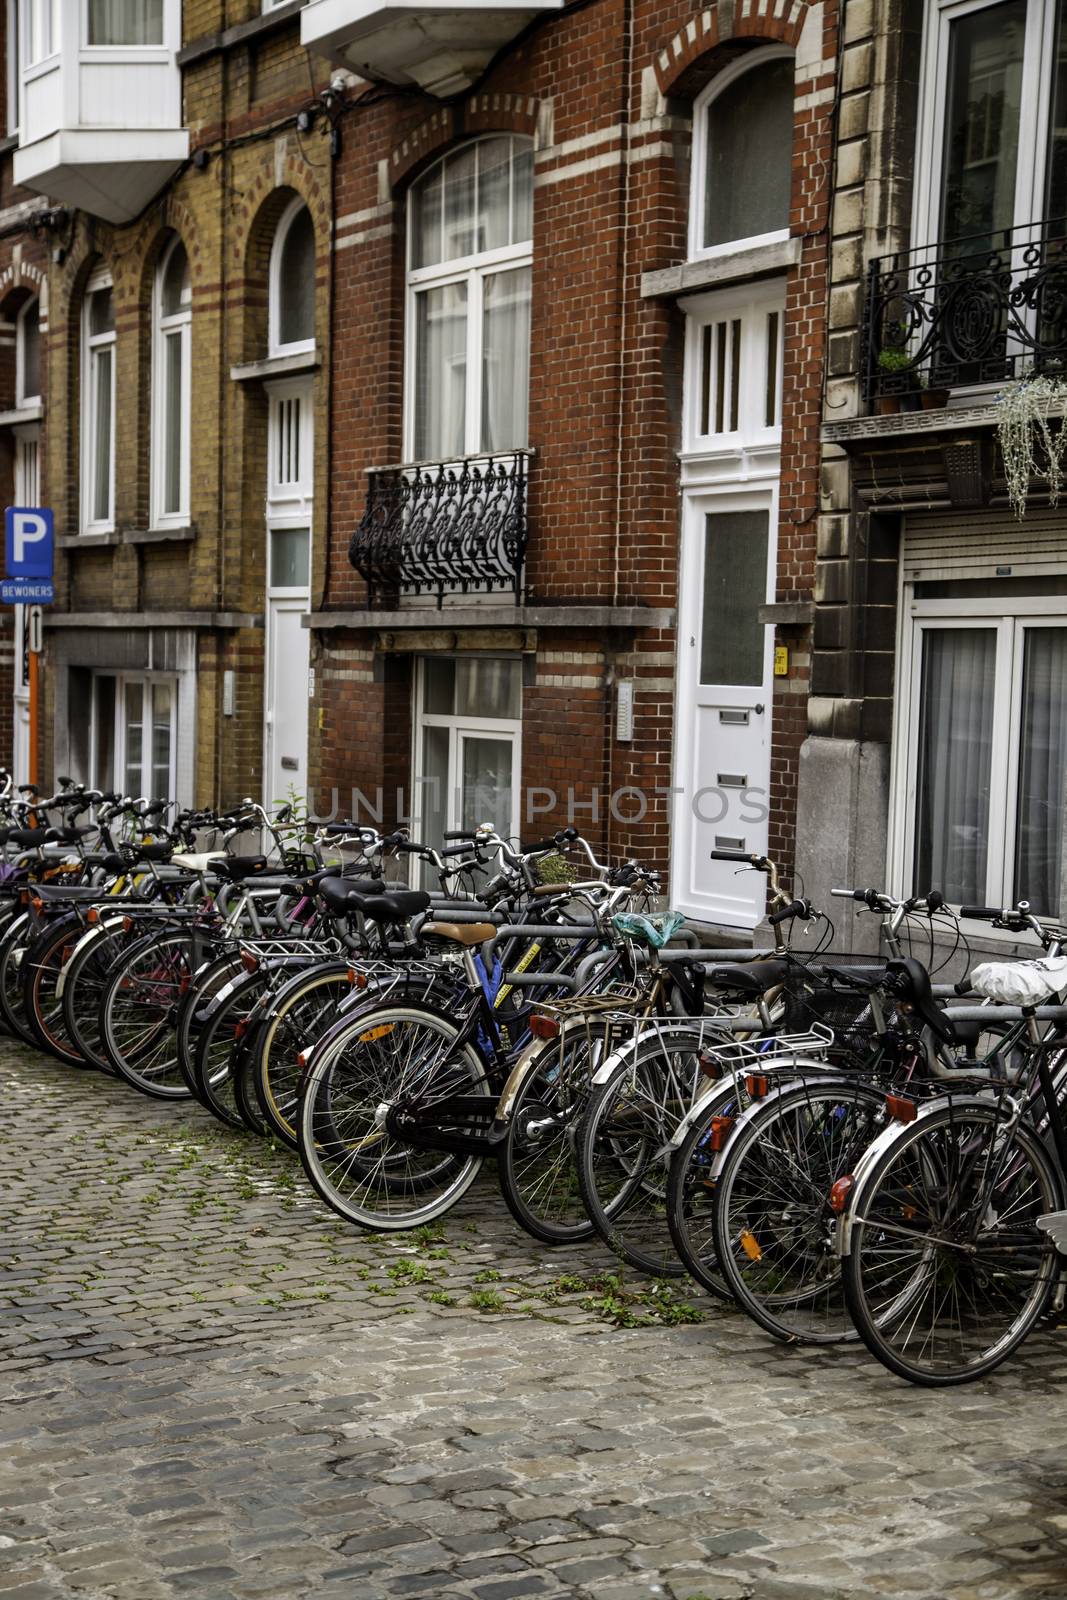 Bicycles parked in the Netherlands by esebene